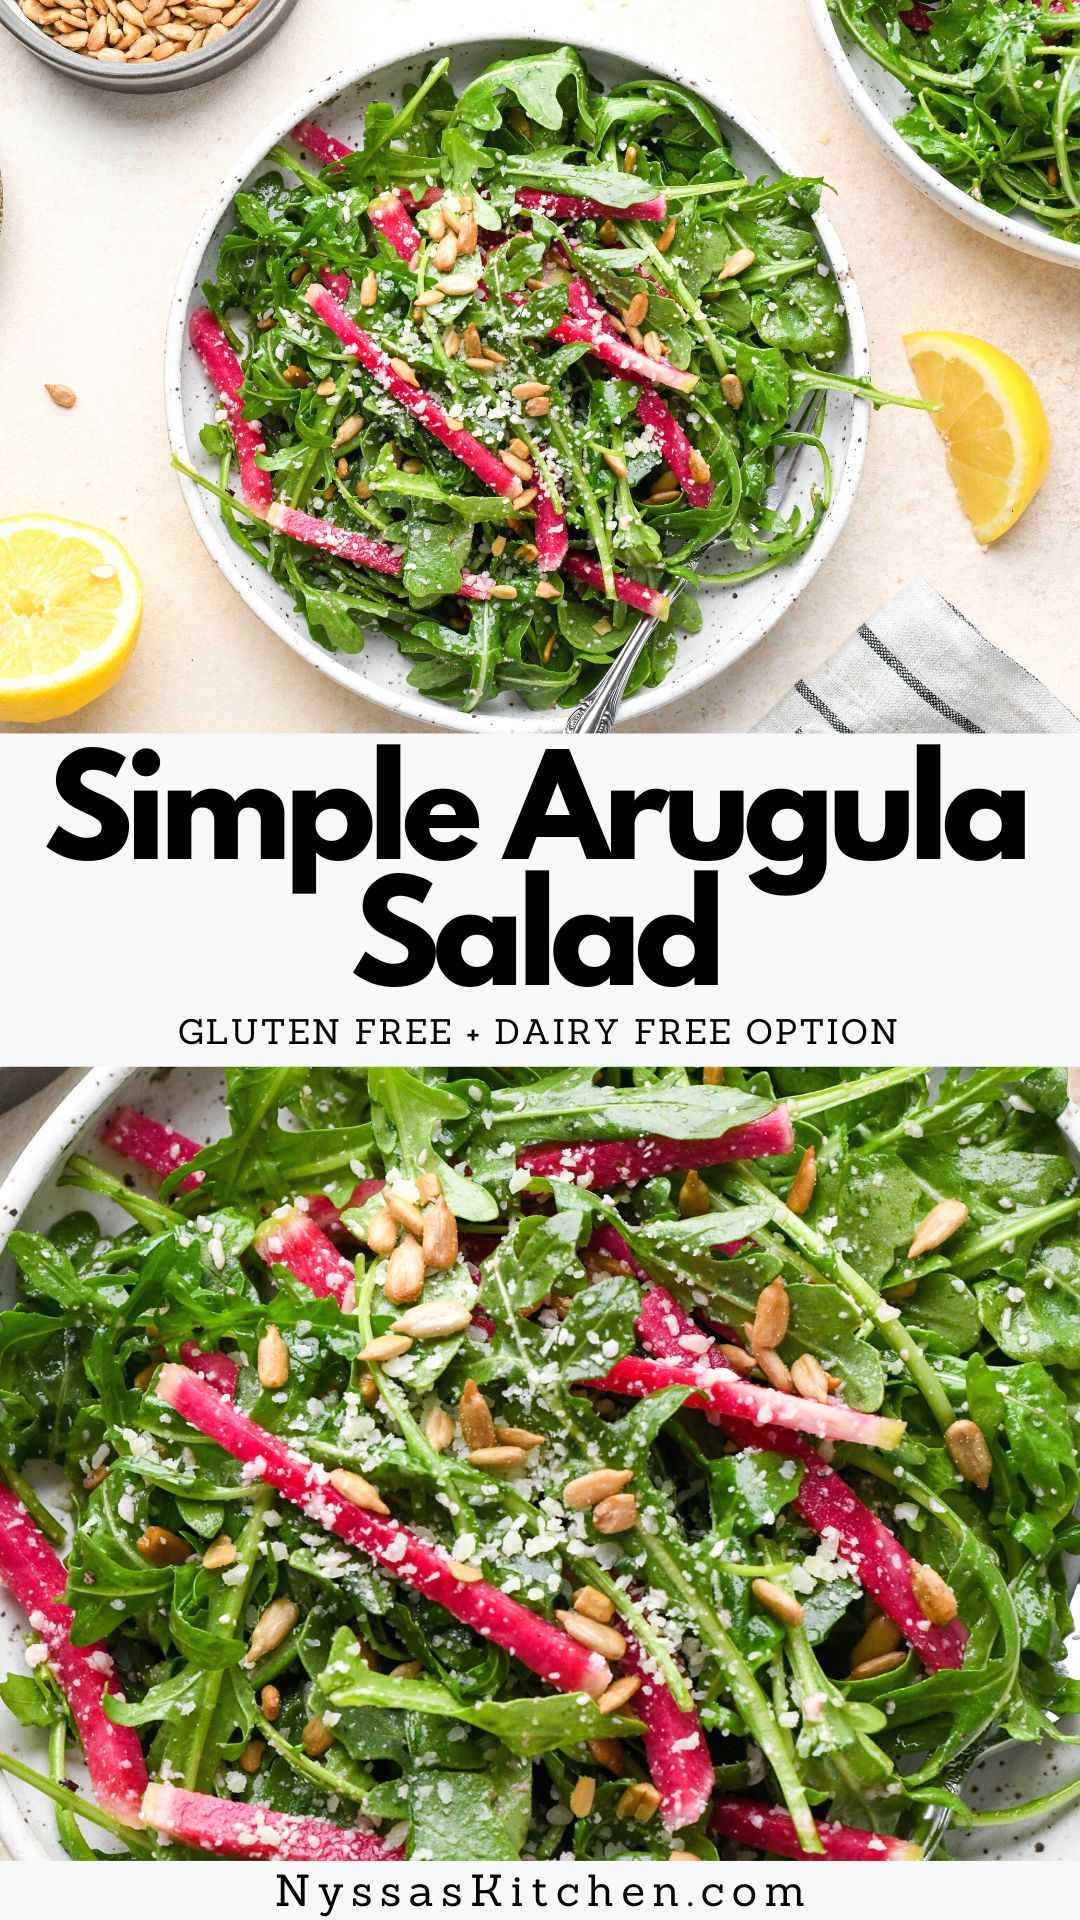 This fresh and simple arugula salad is the best salad to throw together when you're short on time but want something green on your lunch or dinner plate! Made with nutrient dense arugula, thinly sliced radish, sunflower seeds, parmesan cheese, and a simple lemony dressing. Gluten free and easily made dairy free / vegan.